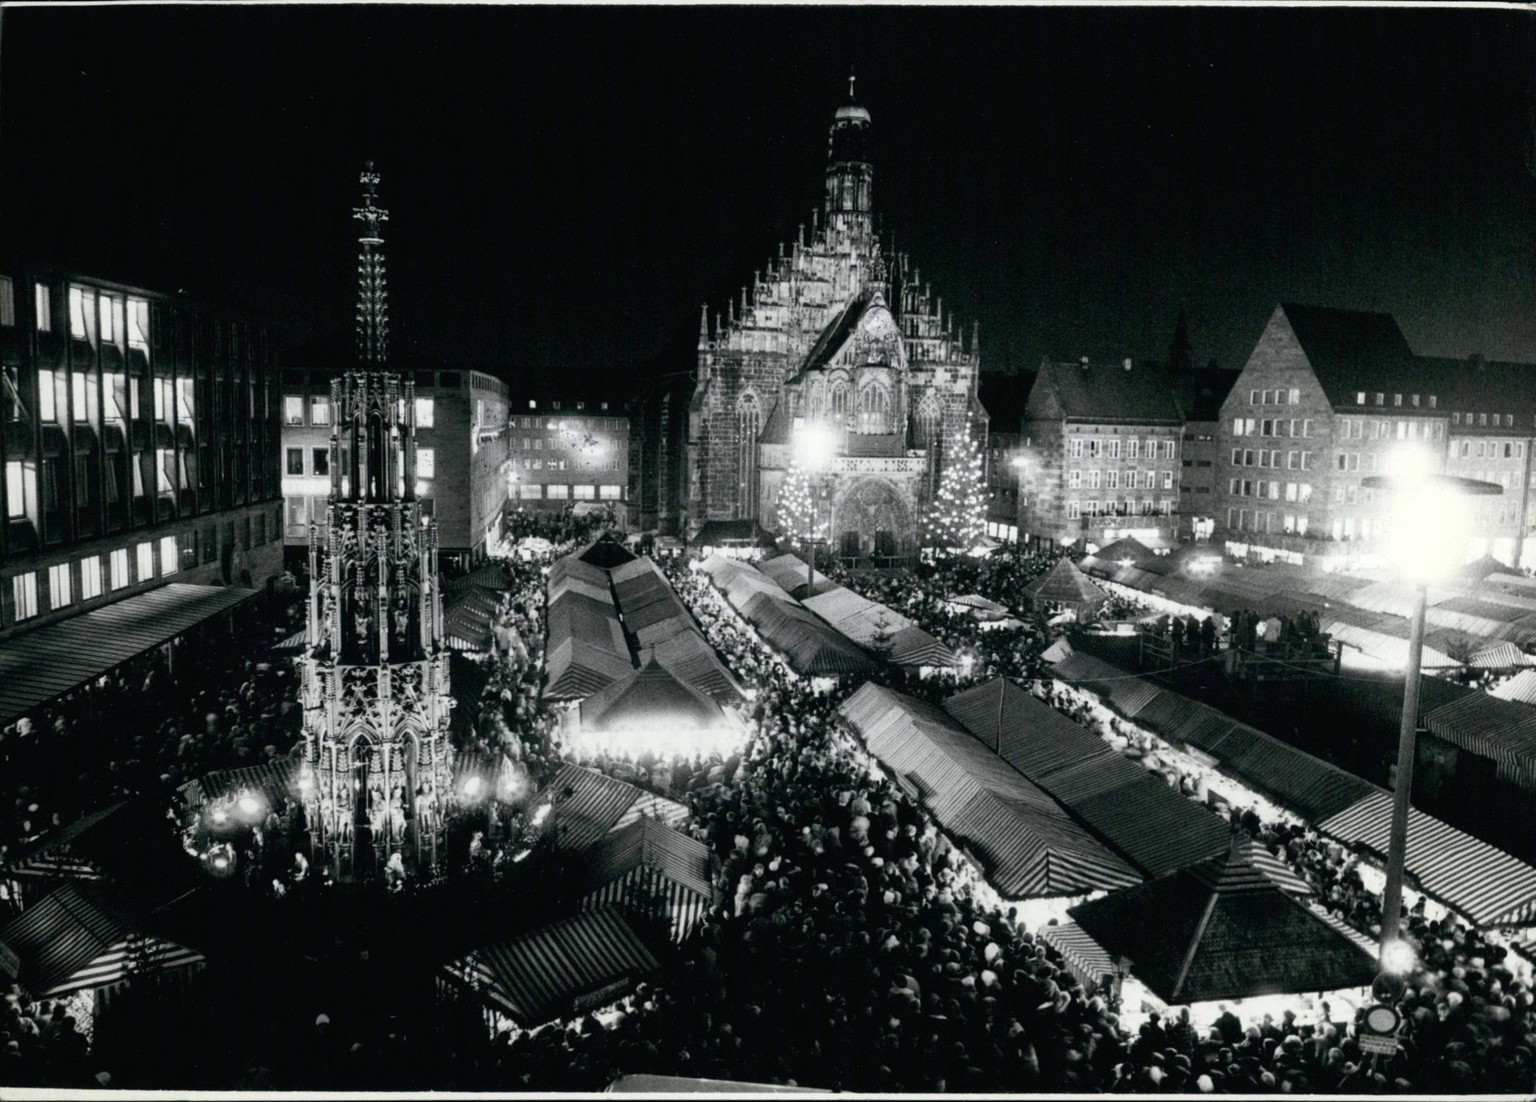 Nov. 11, 1977 - Opening of the Christkindlmarkt in Nurembergh: Up to the best advantage.: shows here itself the Christkindlesmarkt in Nuremberg (FRG). In front of the festivly floodlit Frauenkirche is ...